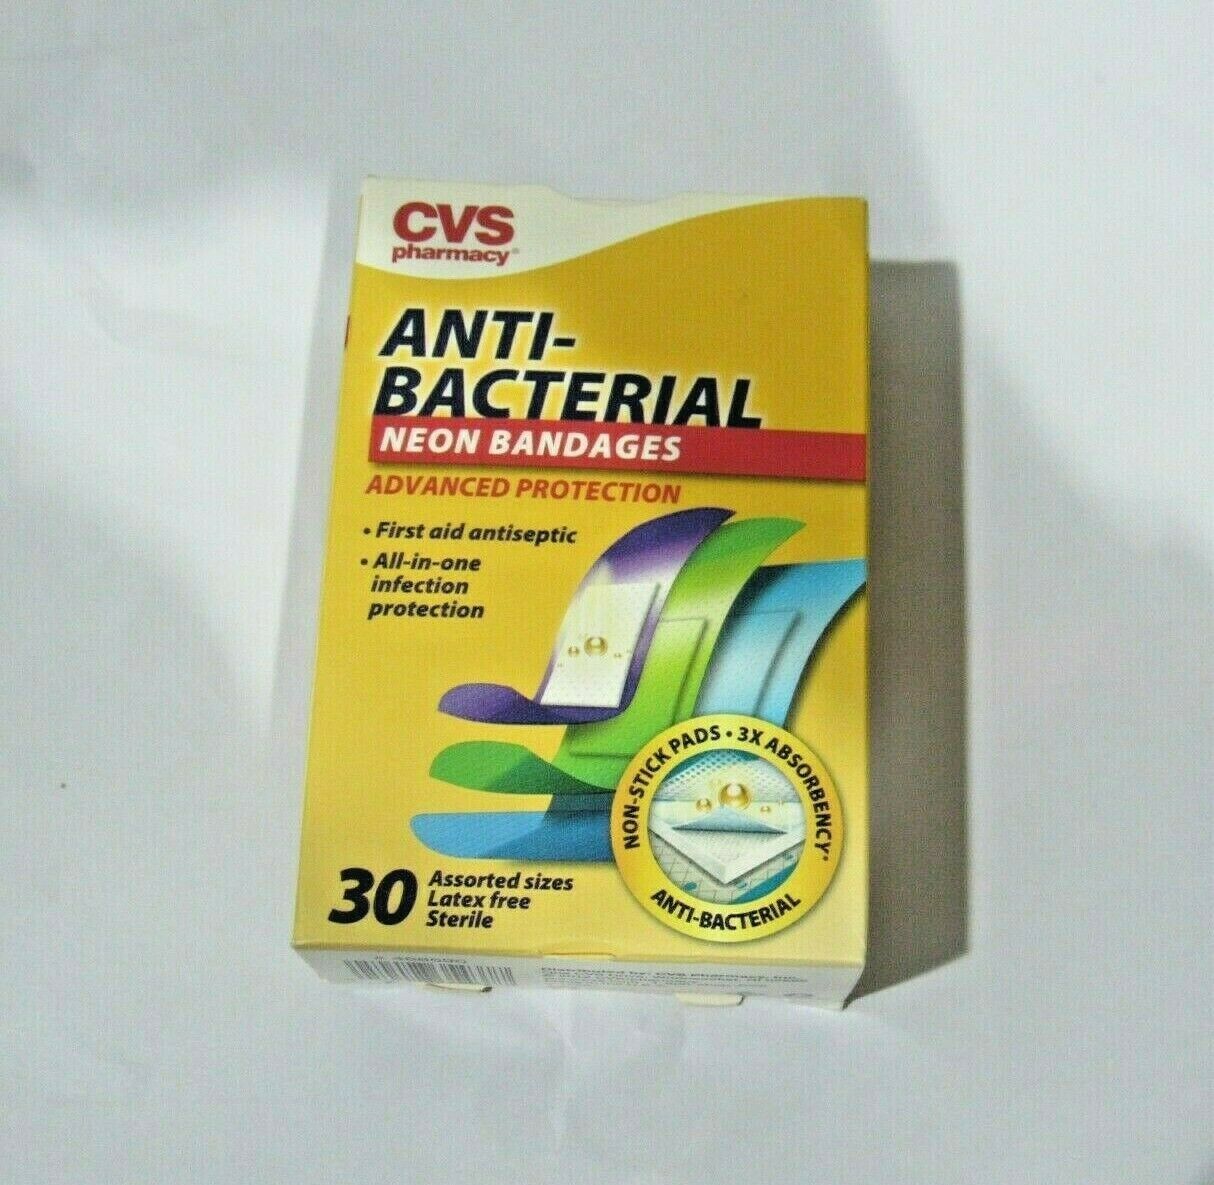 NEON Plastic Anti-Bacterial Bandages 30 Ct per Box 3 Assorted Sizes by CVS - $7.99